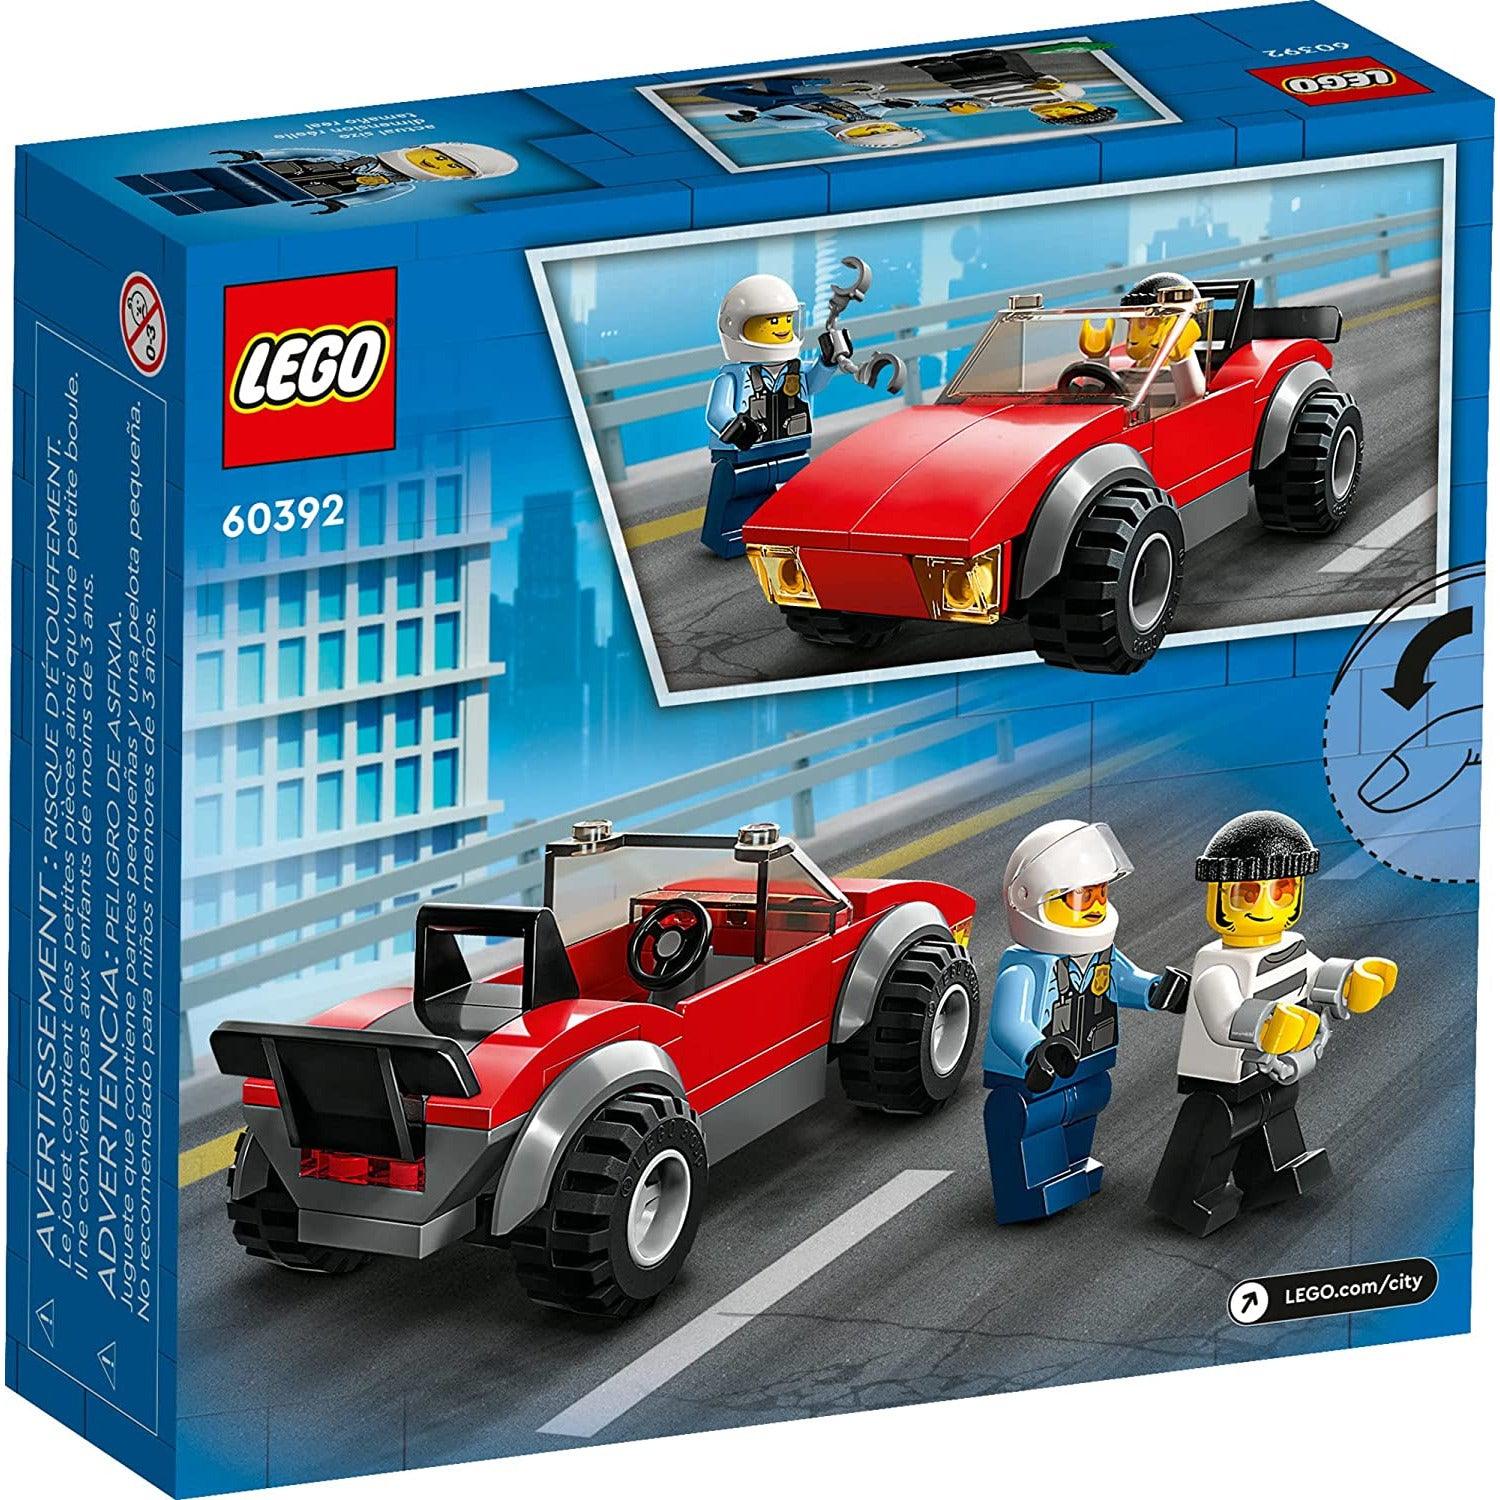 LEGO City 60392 Police Bike Car Chase, Toy with Racing Vehicle & Motorbike Toys (59 Pieces) - BumbleToys - 4+ Years, 5-7 Years, 6+ Years, Boys, Cars, City, Clearance, EXO, LEGO, Pre-Order